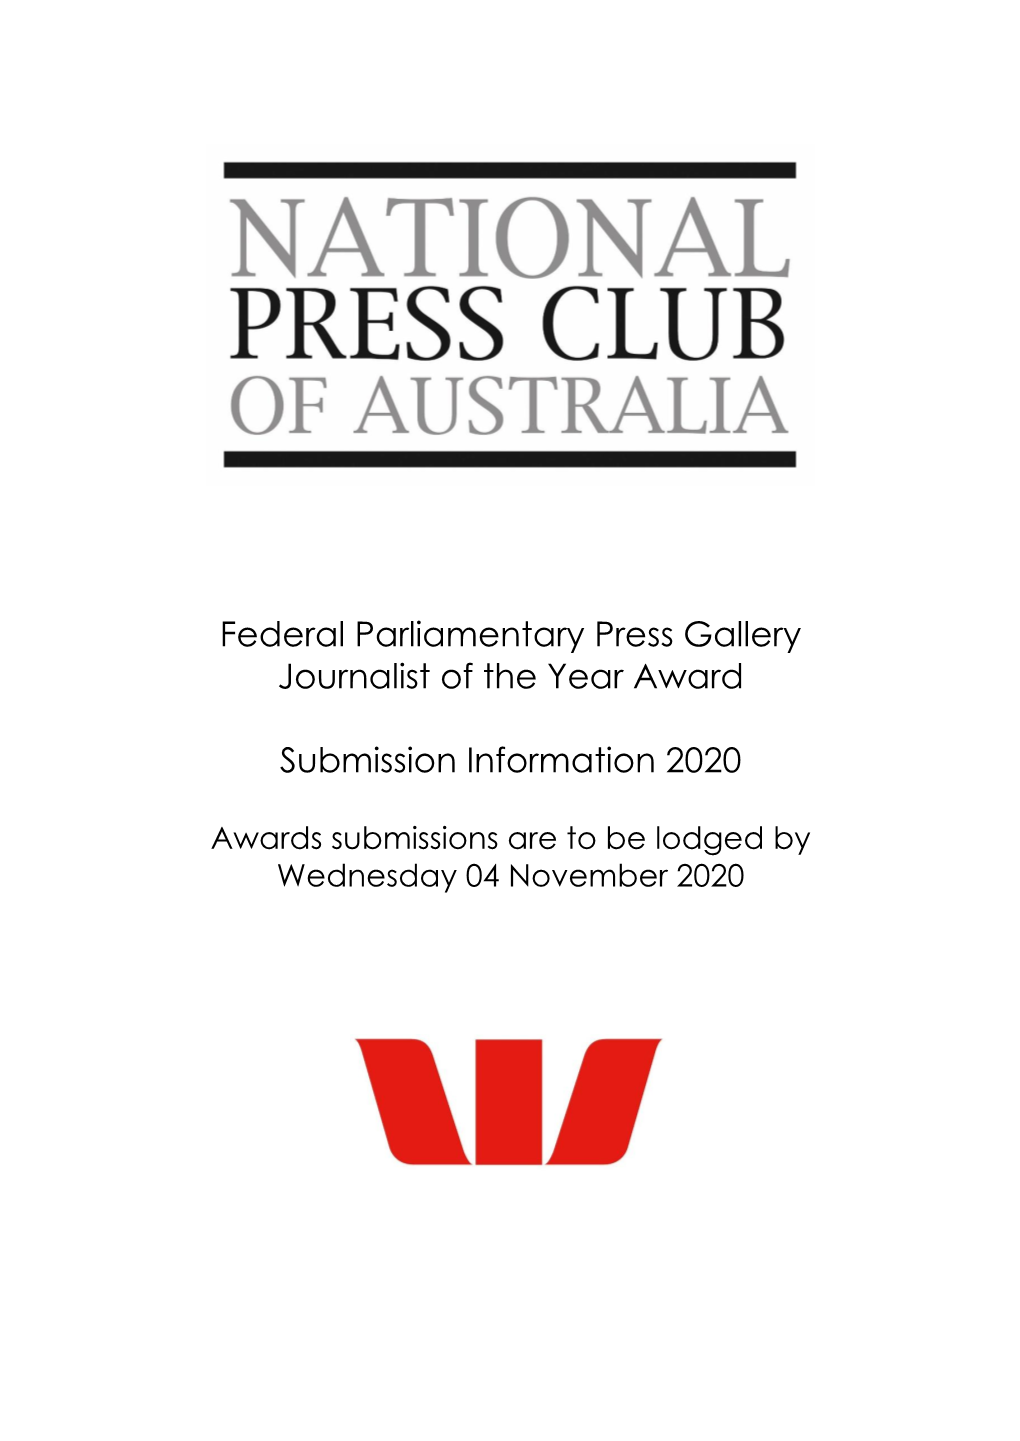 Federal Parliamentary Press Gallery Journalist of the Year Award